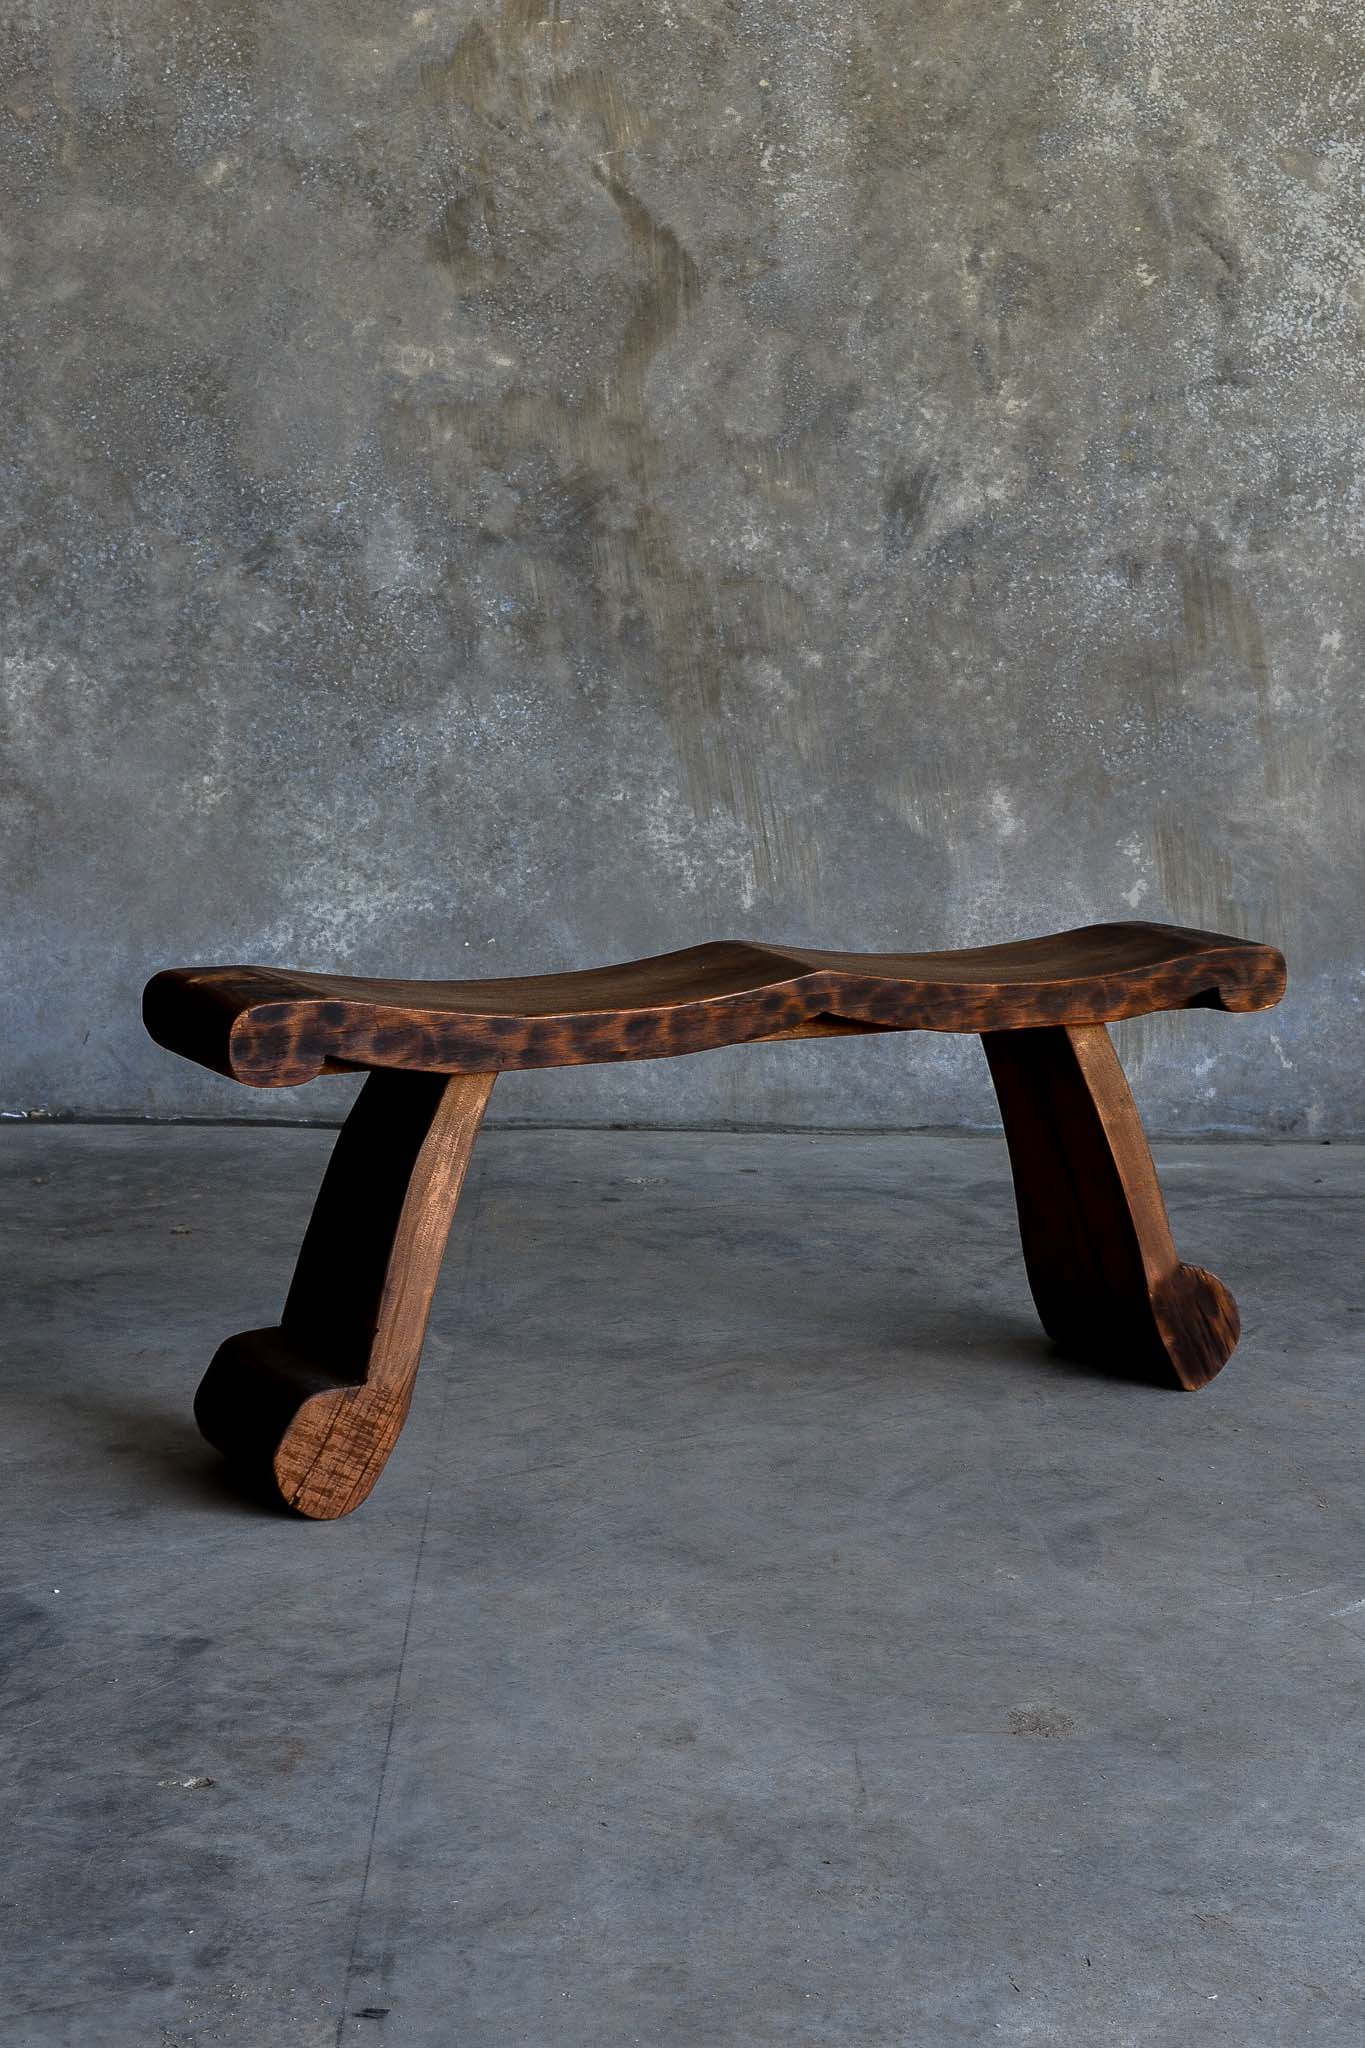 Antique Javanese wave Bench - One